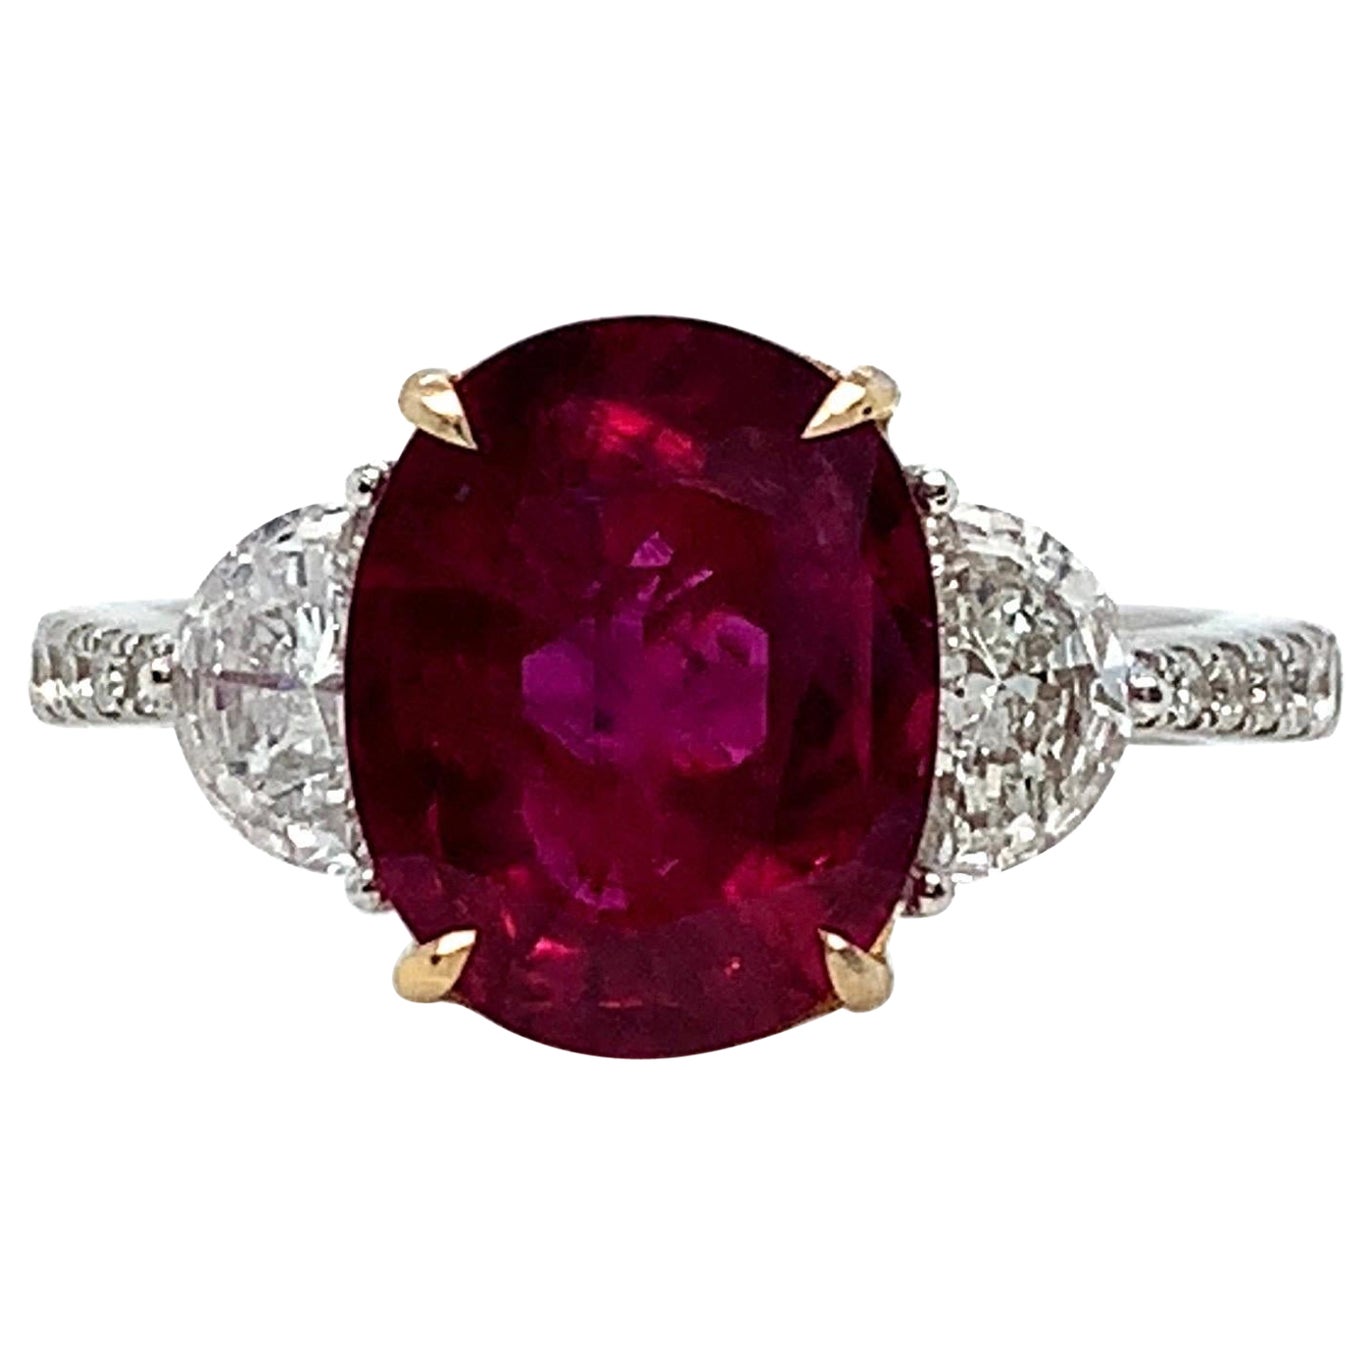 GIA Certified 4.13 Carat Thai Heated Ruby and Diamond Engagement Ring